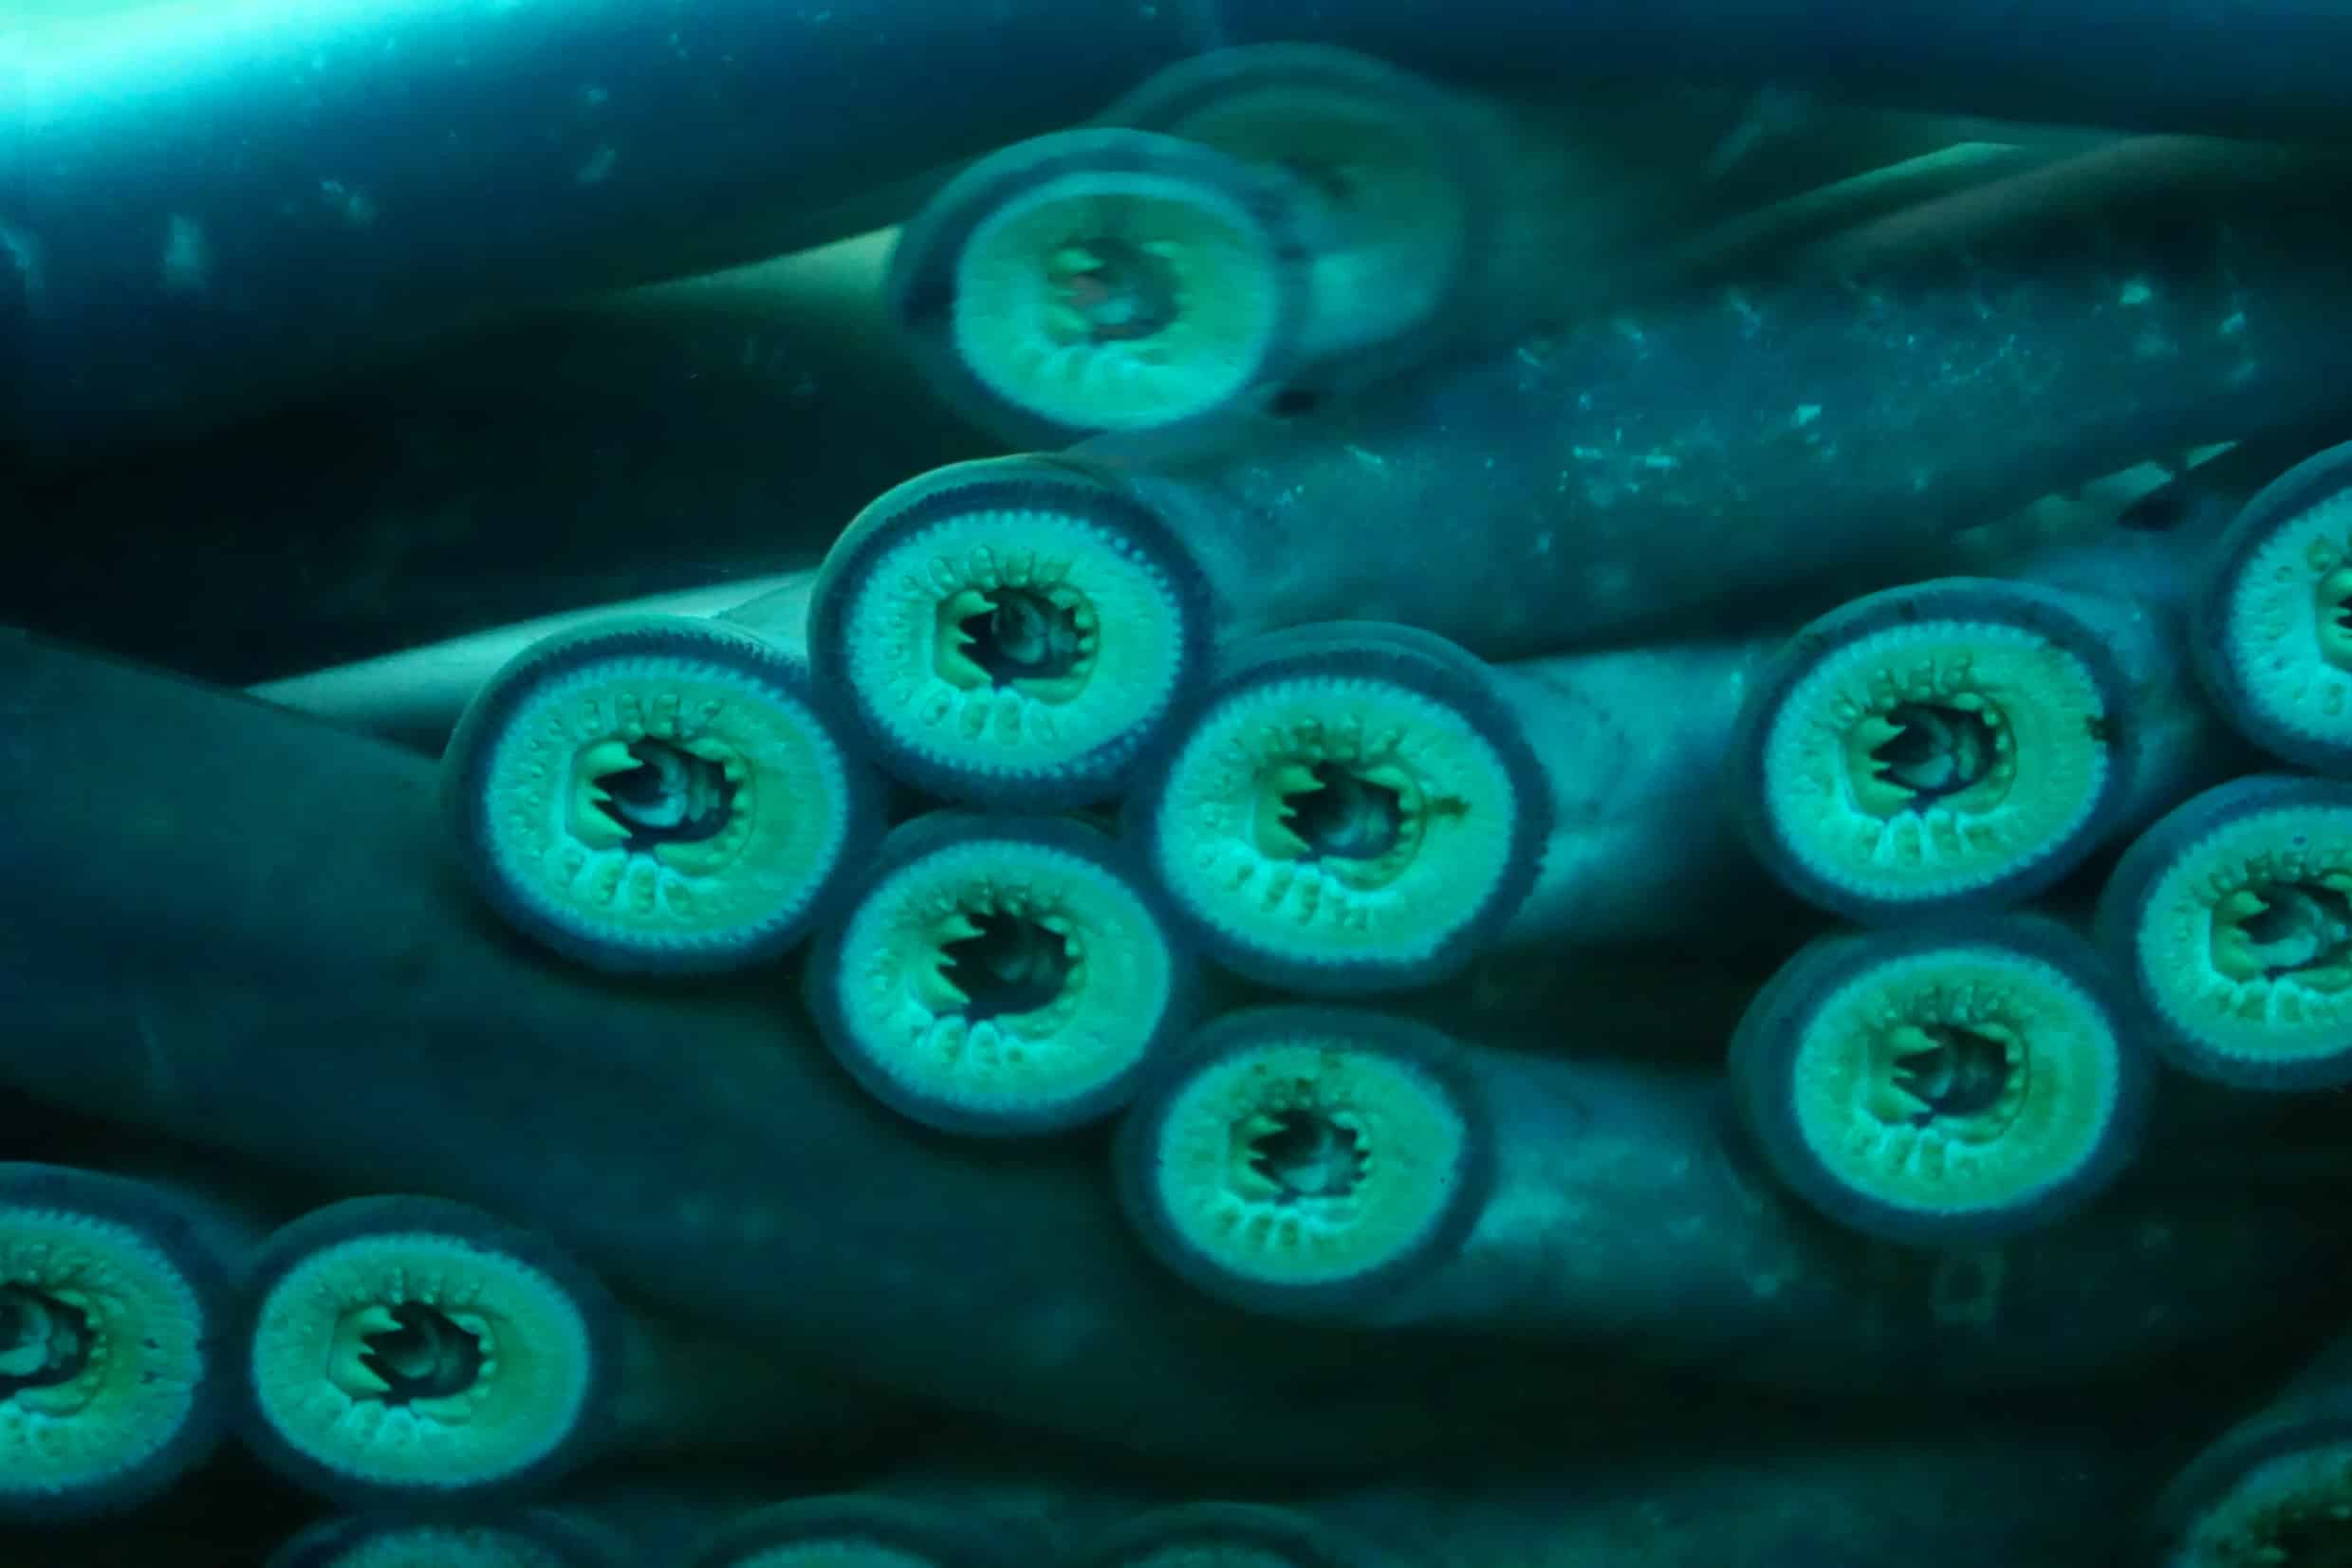 a dozen lampreys are in the frame.Their mouths are all open. theyarenround and filled with teeth.